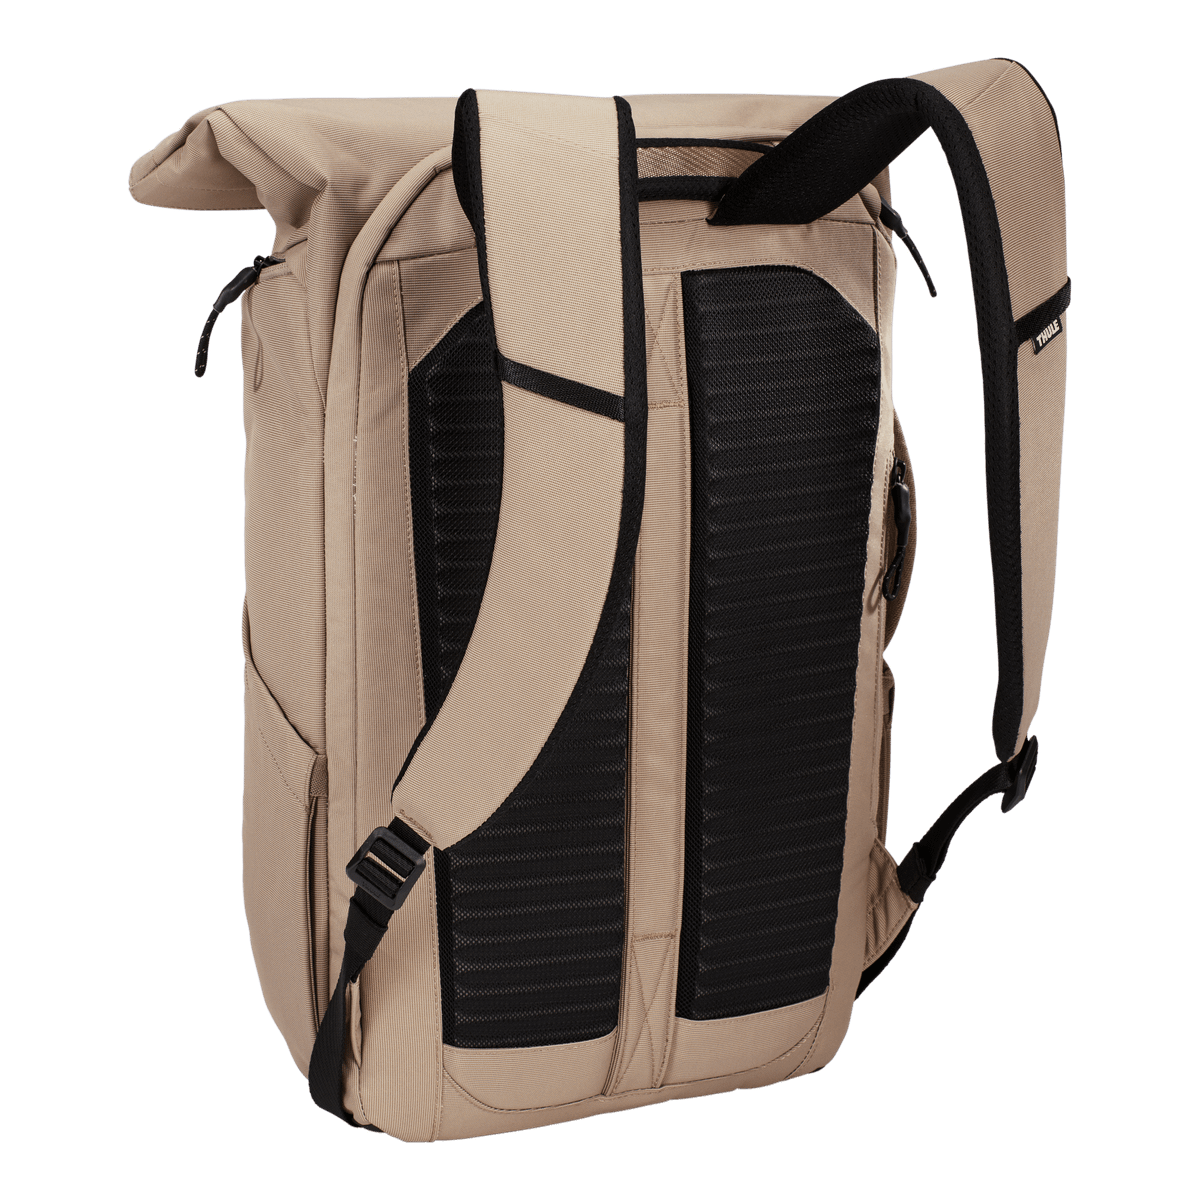 Thule Paramount backpack 24L timberwolf beige